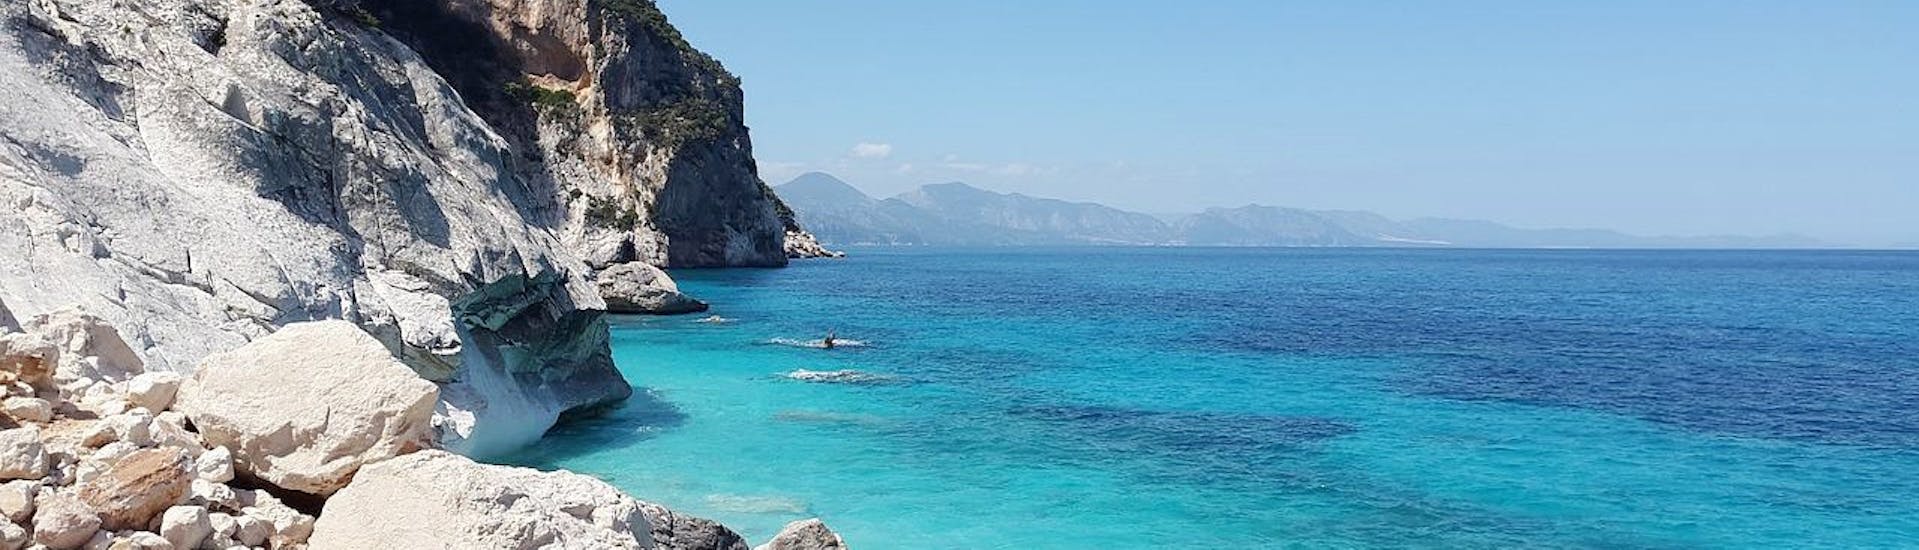 Photo of the enchanting Cala Goloritzé taken during a boat trip from Cala Gonone along the Gulf of Orosei with an aperitif with Dovesesto Cala Gonone.